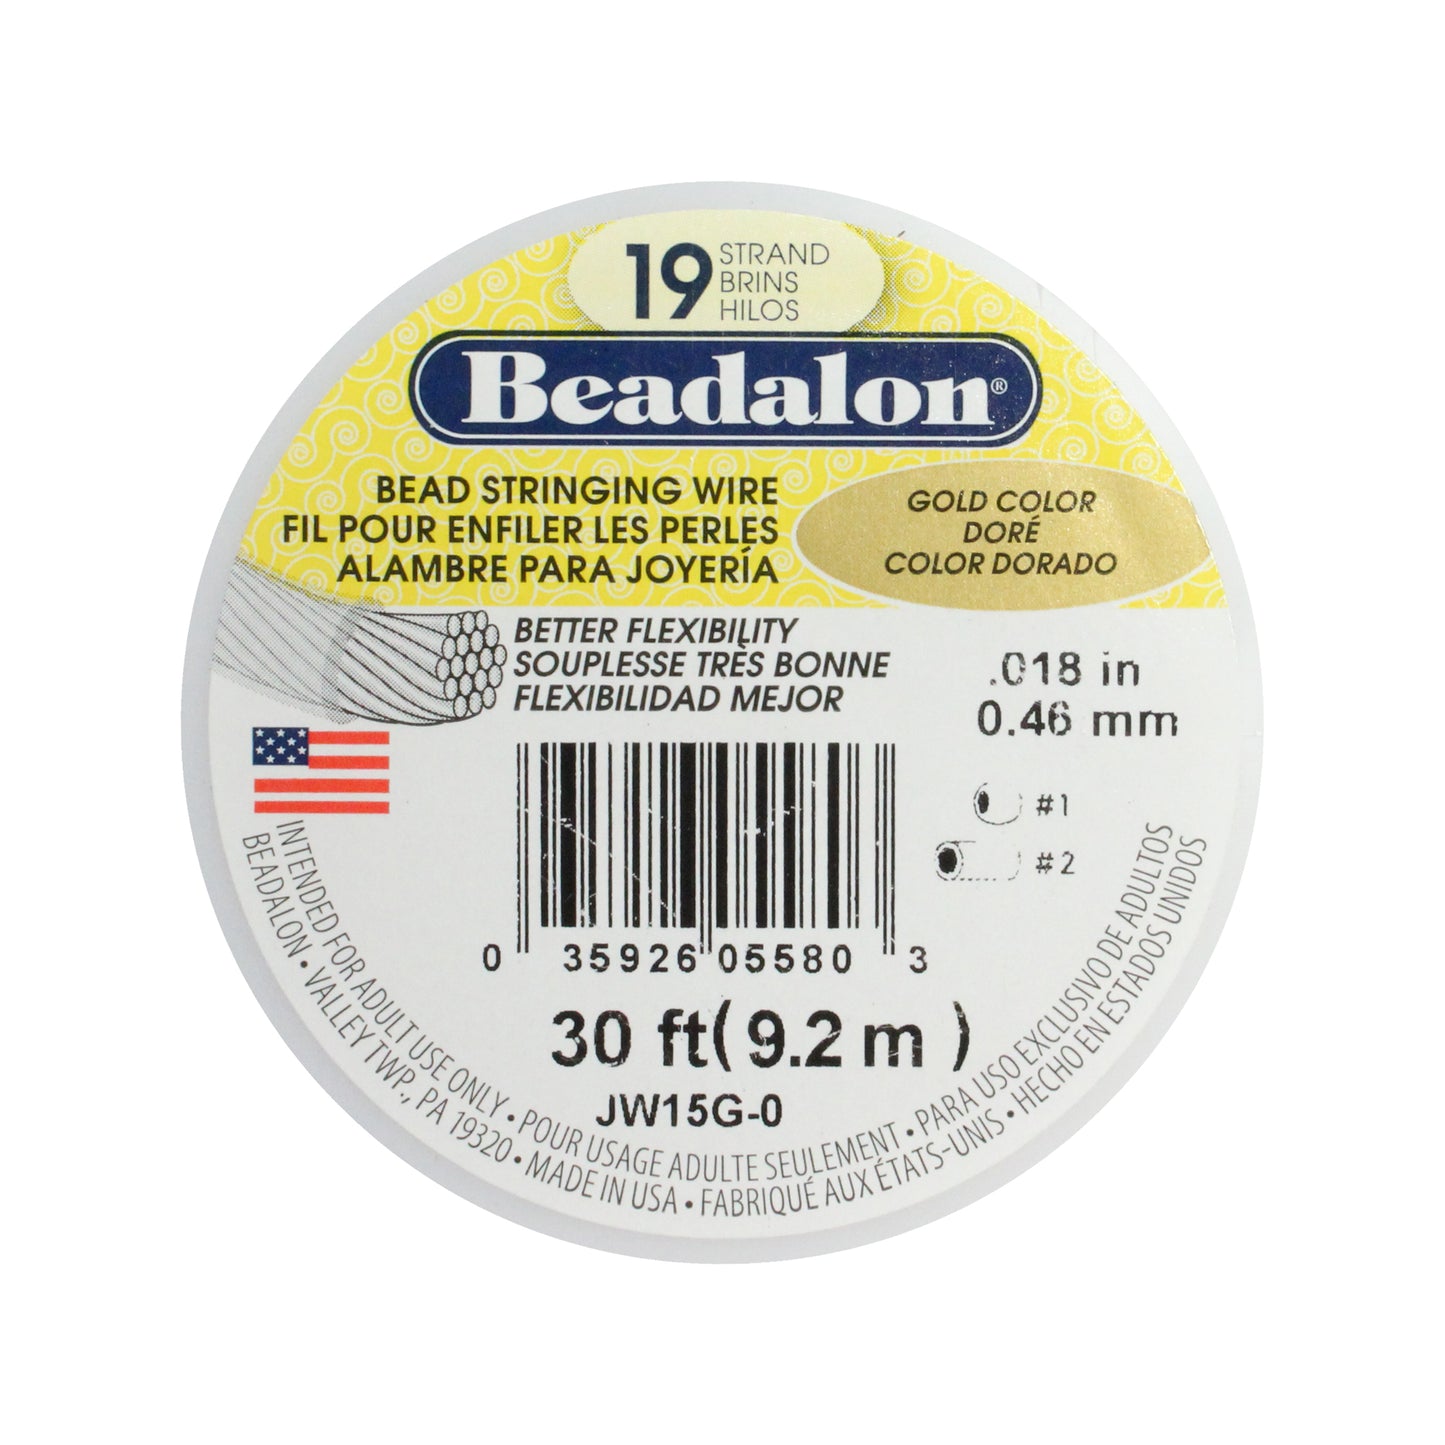 Beadalon 19 Strand Bead Stringing Wire / 30 foot roll (9.2m) / Gold Color / Nylon Coated